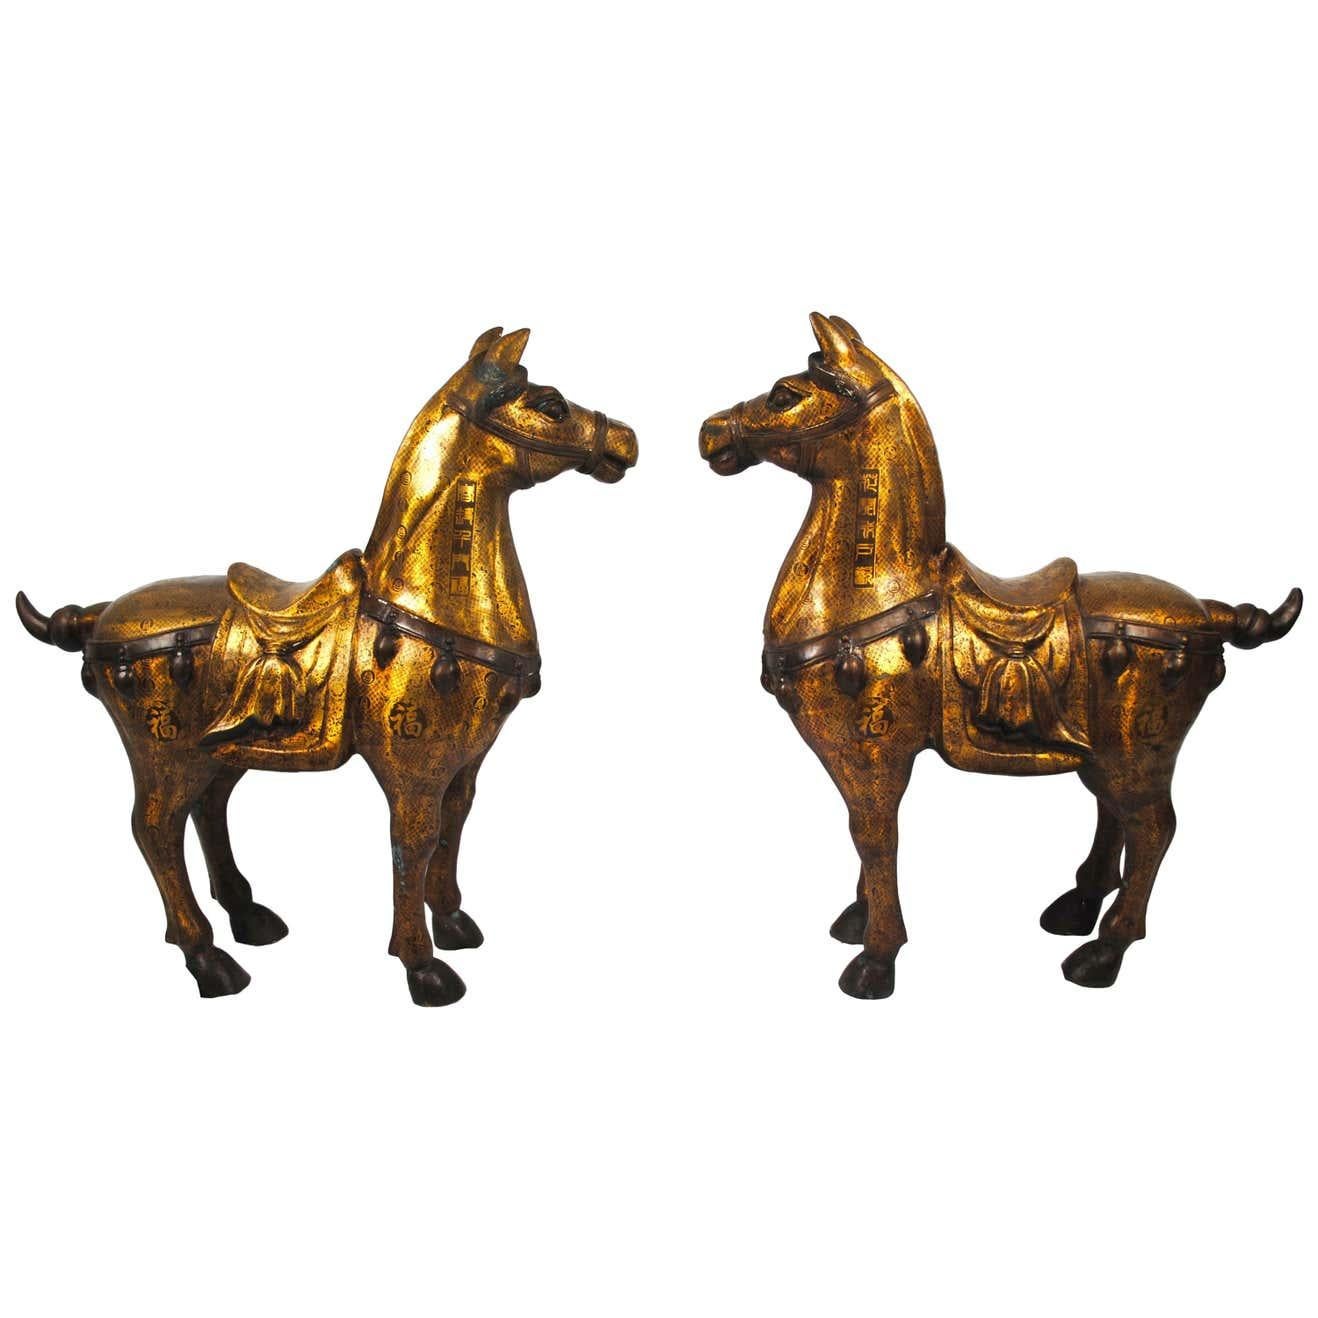 A pair of 20th century bronze gilded gift horses. Lavish pair of cast brass and gold gilt horse statues or sculptures made in the Chinese Tang dynasty style. Features intricately cast bodies with detailed Chinese characters echoed over the both